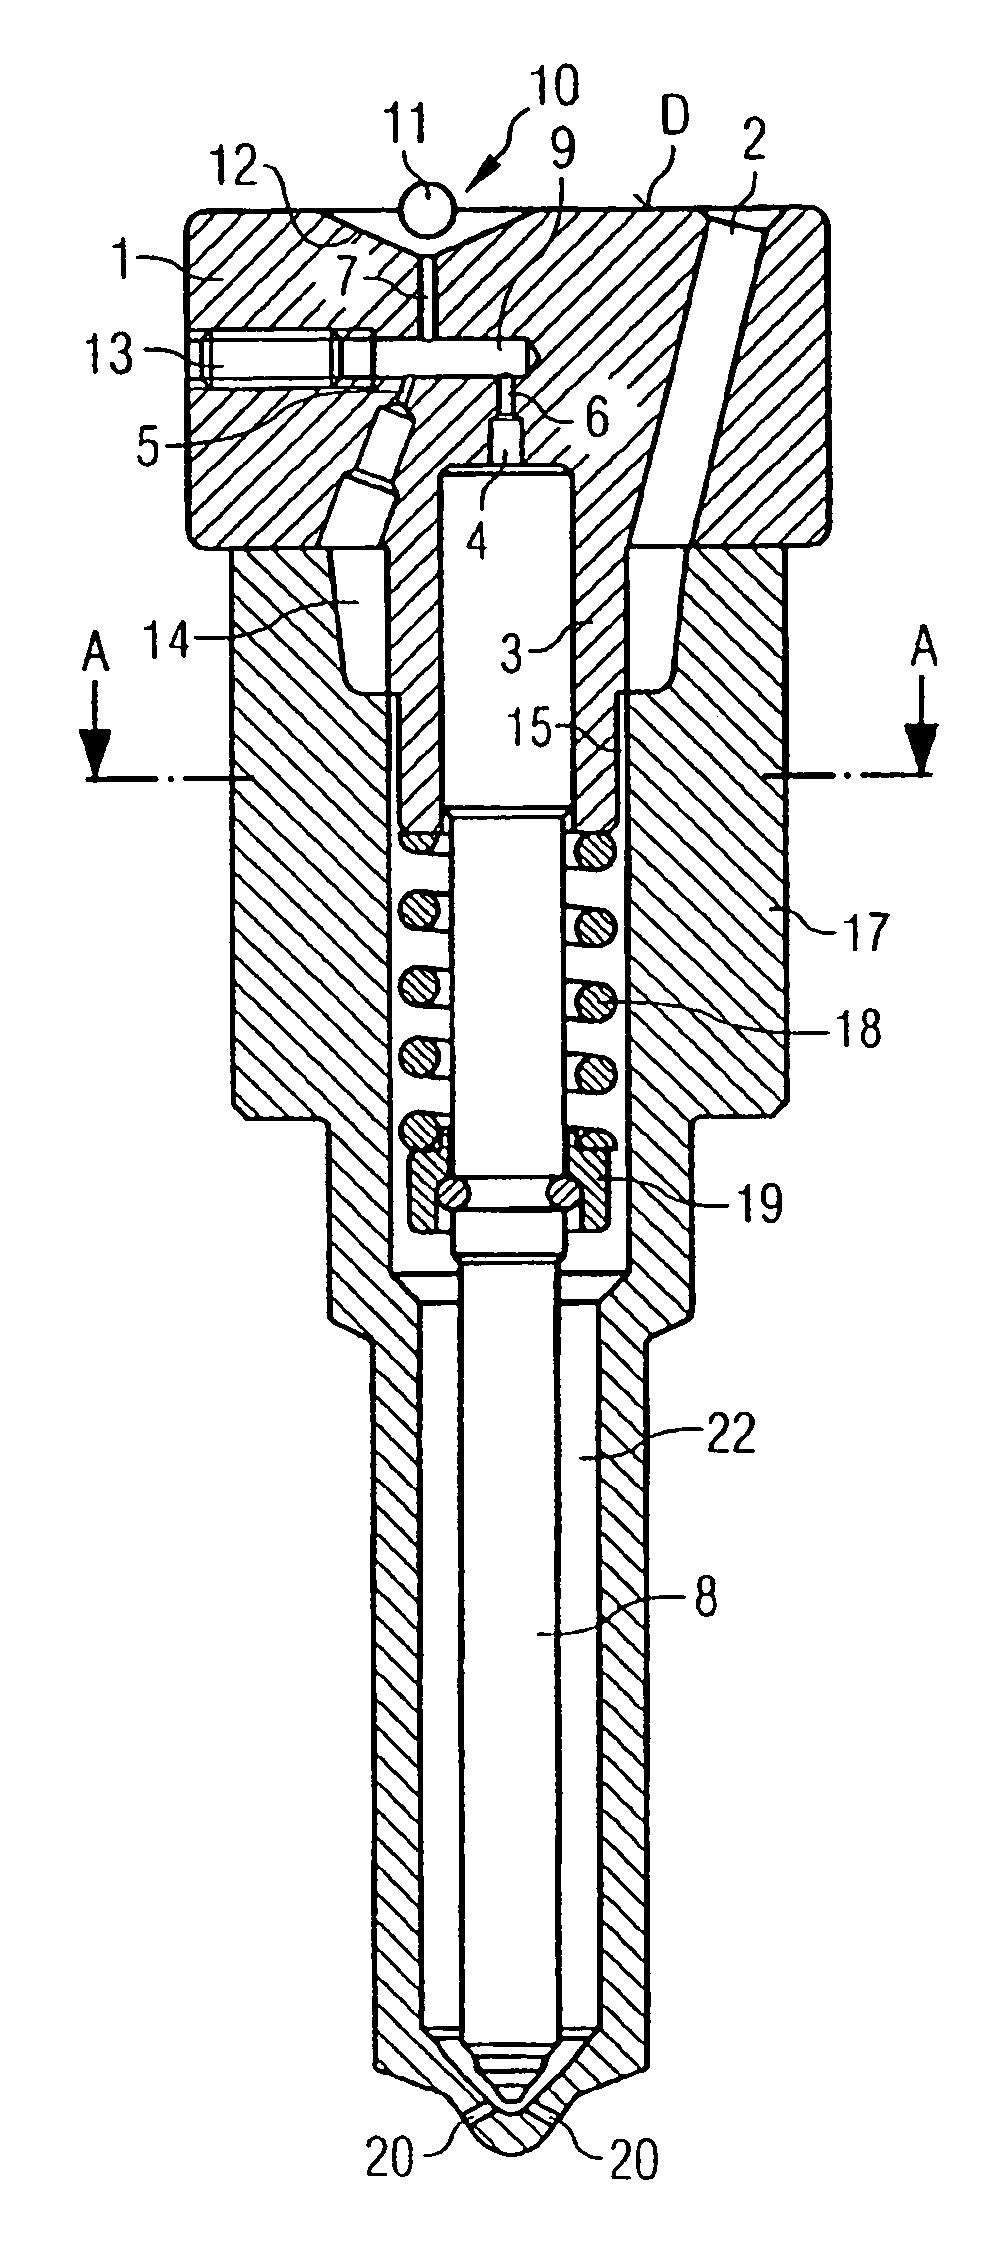 Control module for a storage-type injection system injector